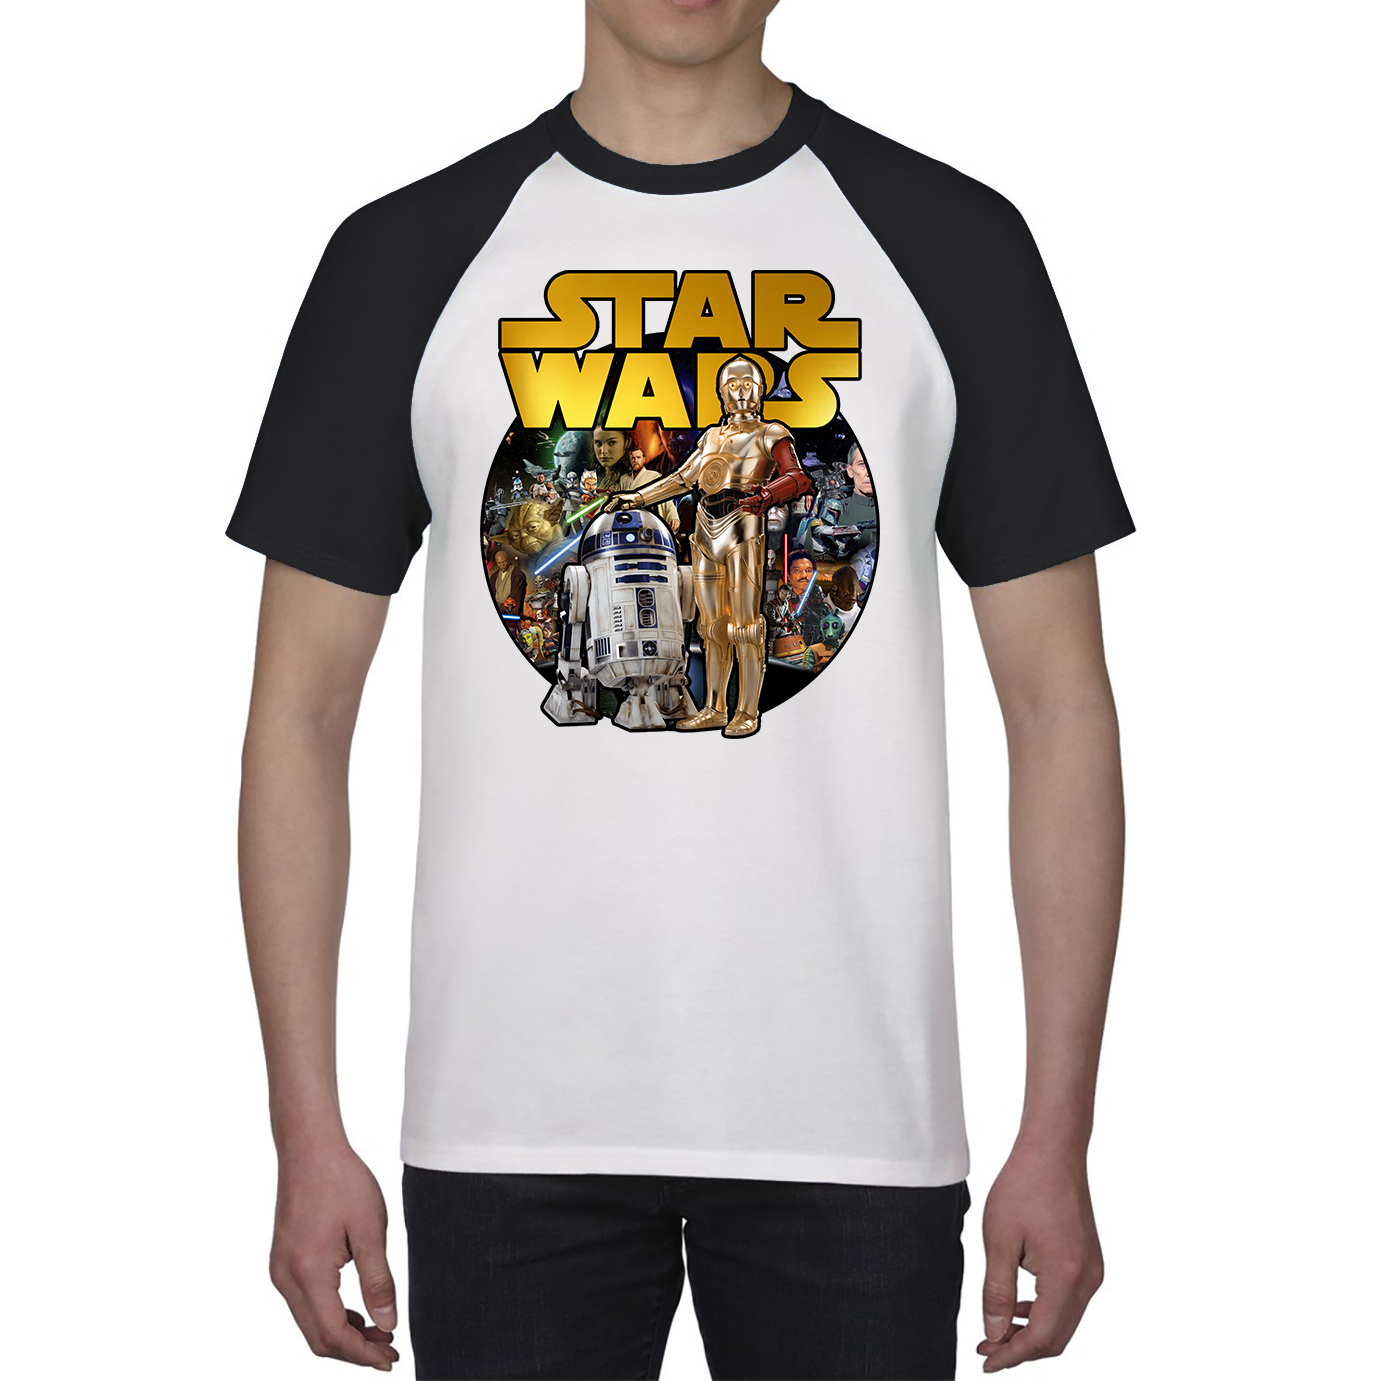 Star Wars These aren't The Droids You're Looking for Shirt Funny Star Wars R2D2 C3PO Baseball T Shirt